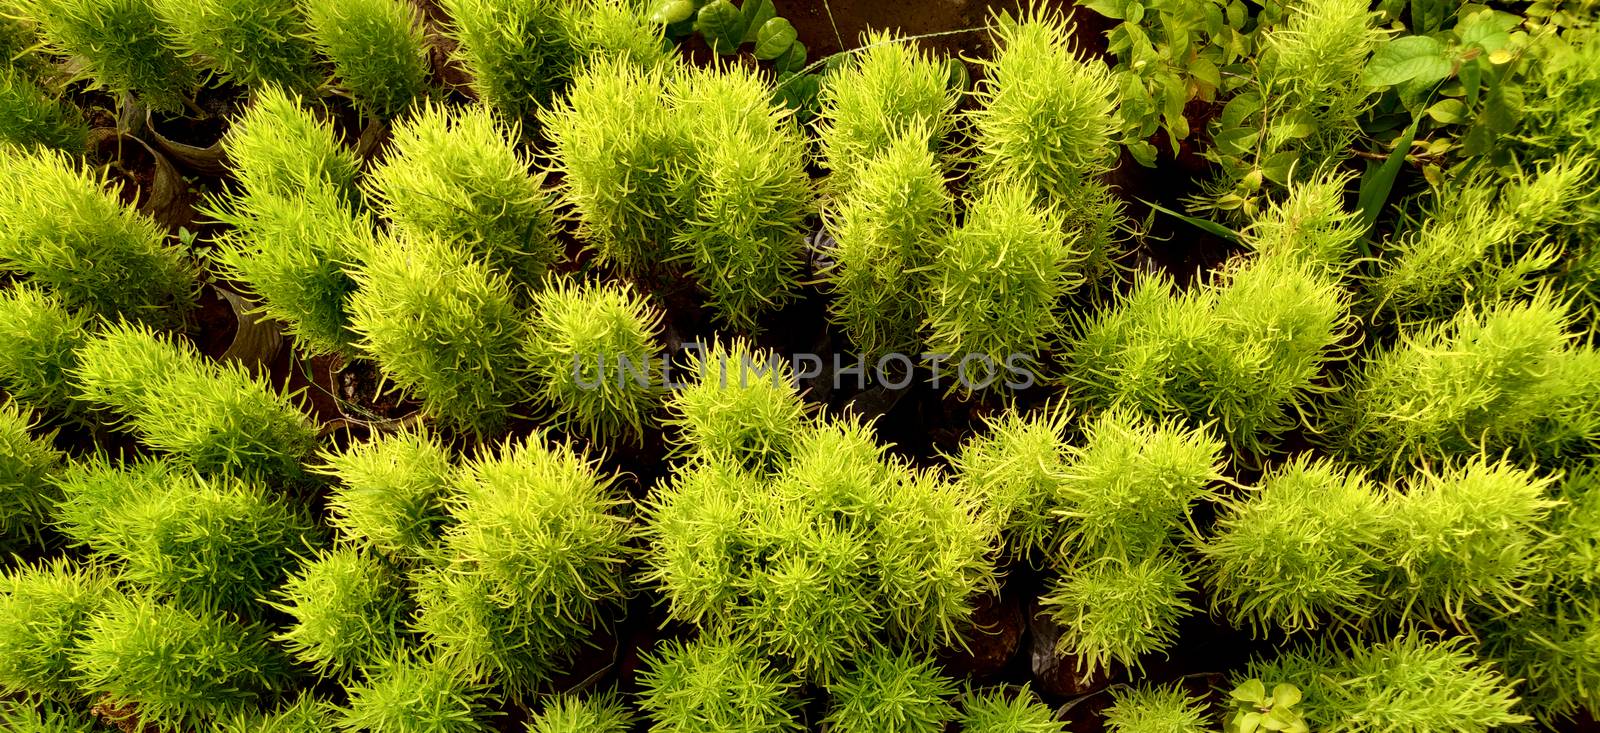 Green Bassia scoparia shrubs and plants from top angle looking like a forest captured with drone inside the plant nursery in New Delhi, India